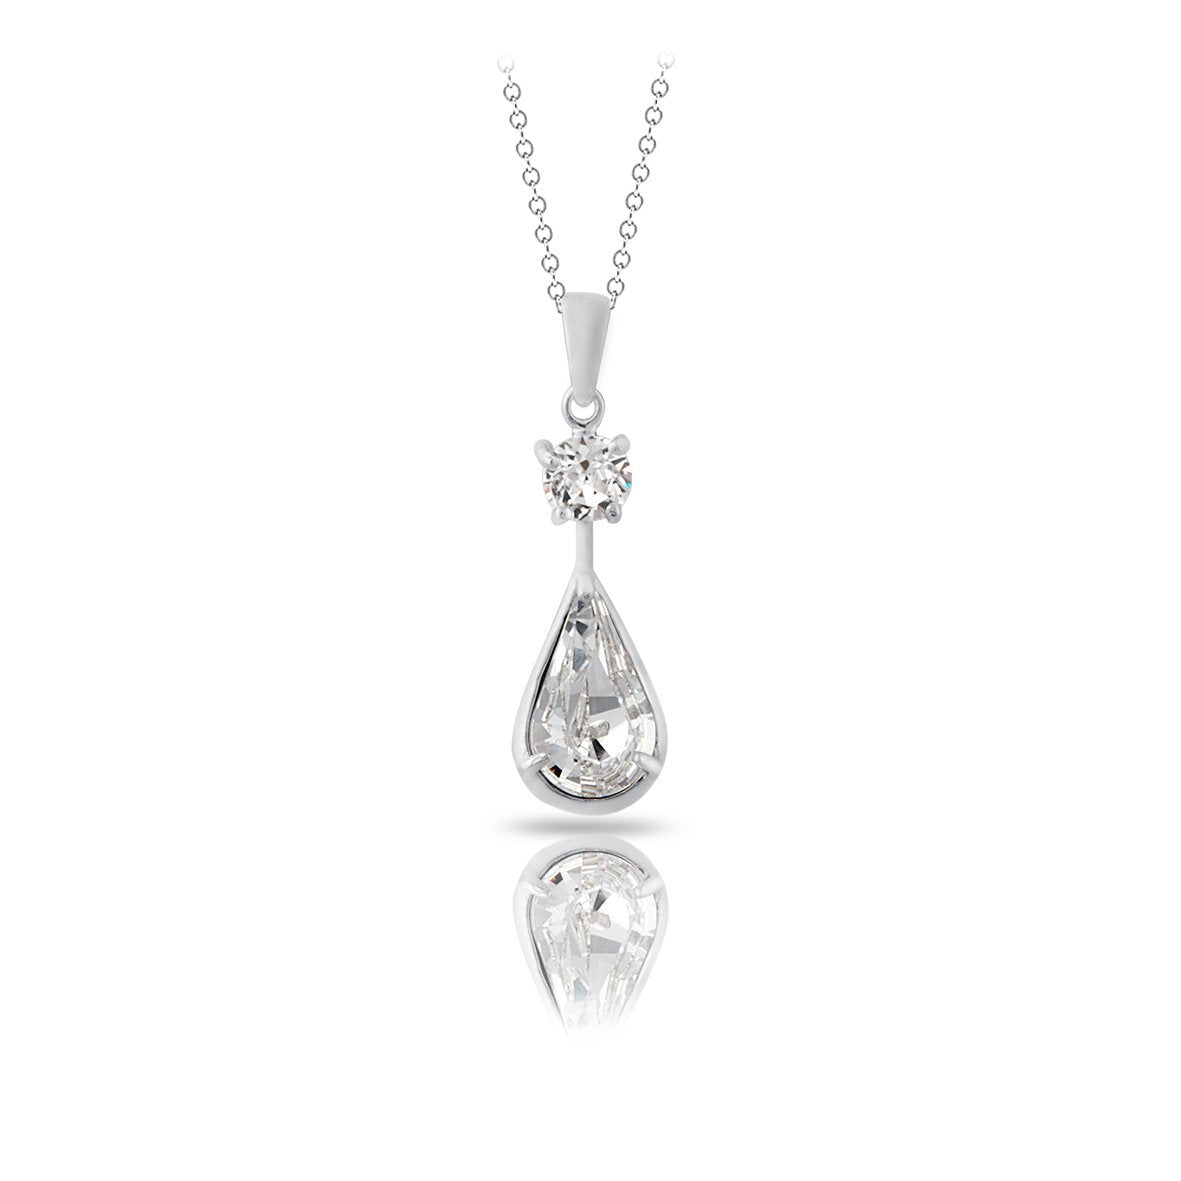 Sterling Silver Teardrop Pendant with crystals from Swarovski®